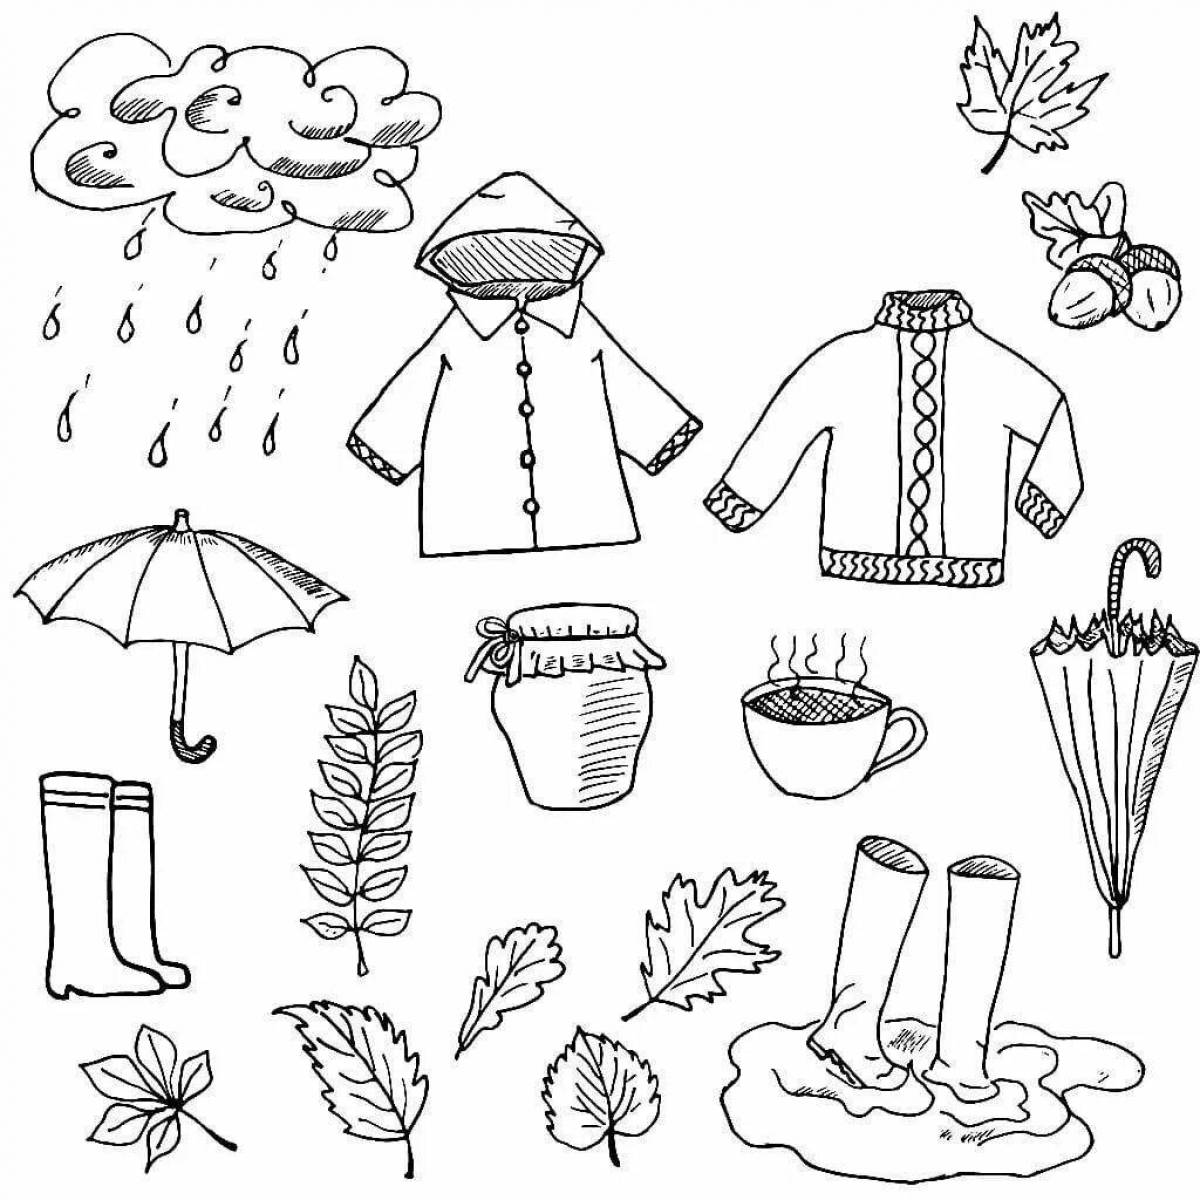 Fine clothes coloring page